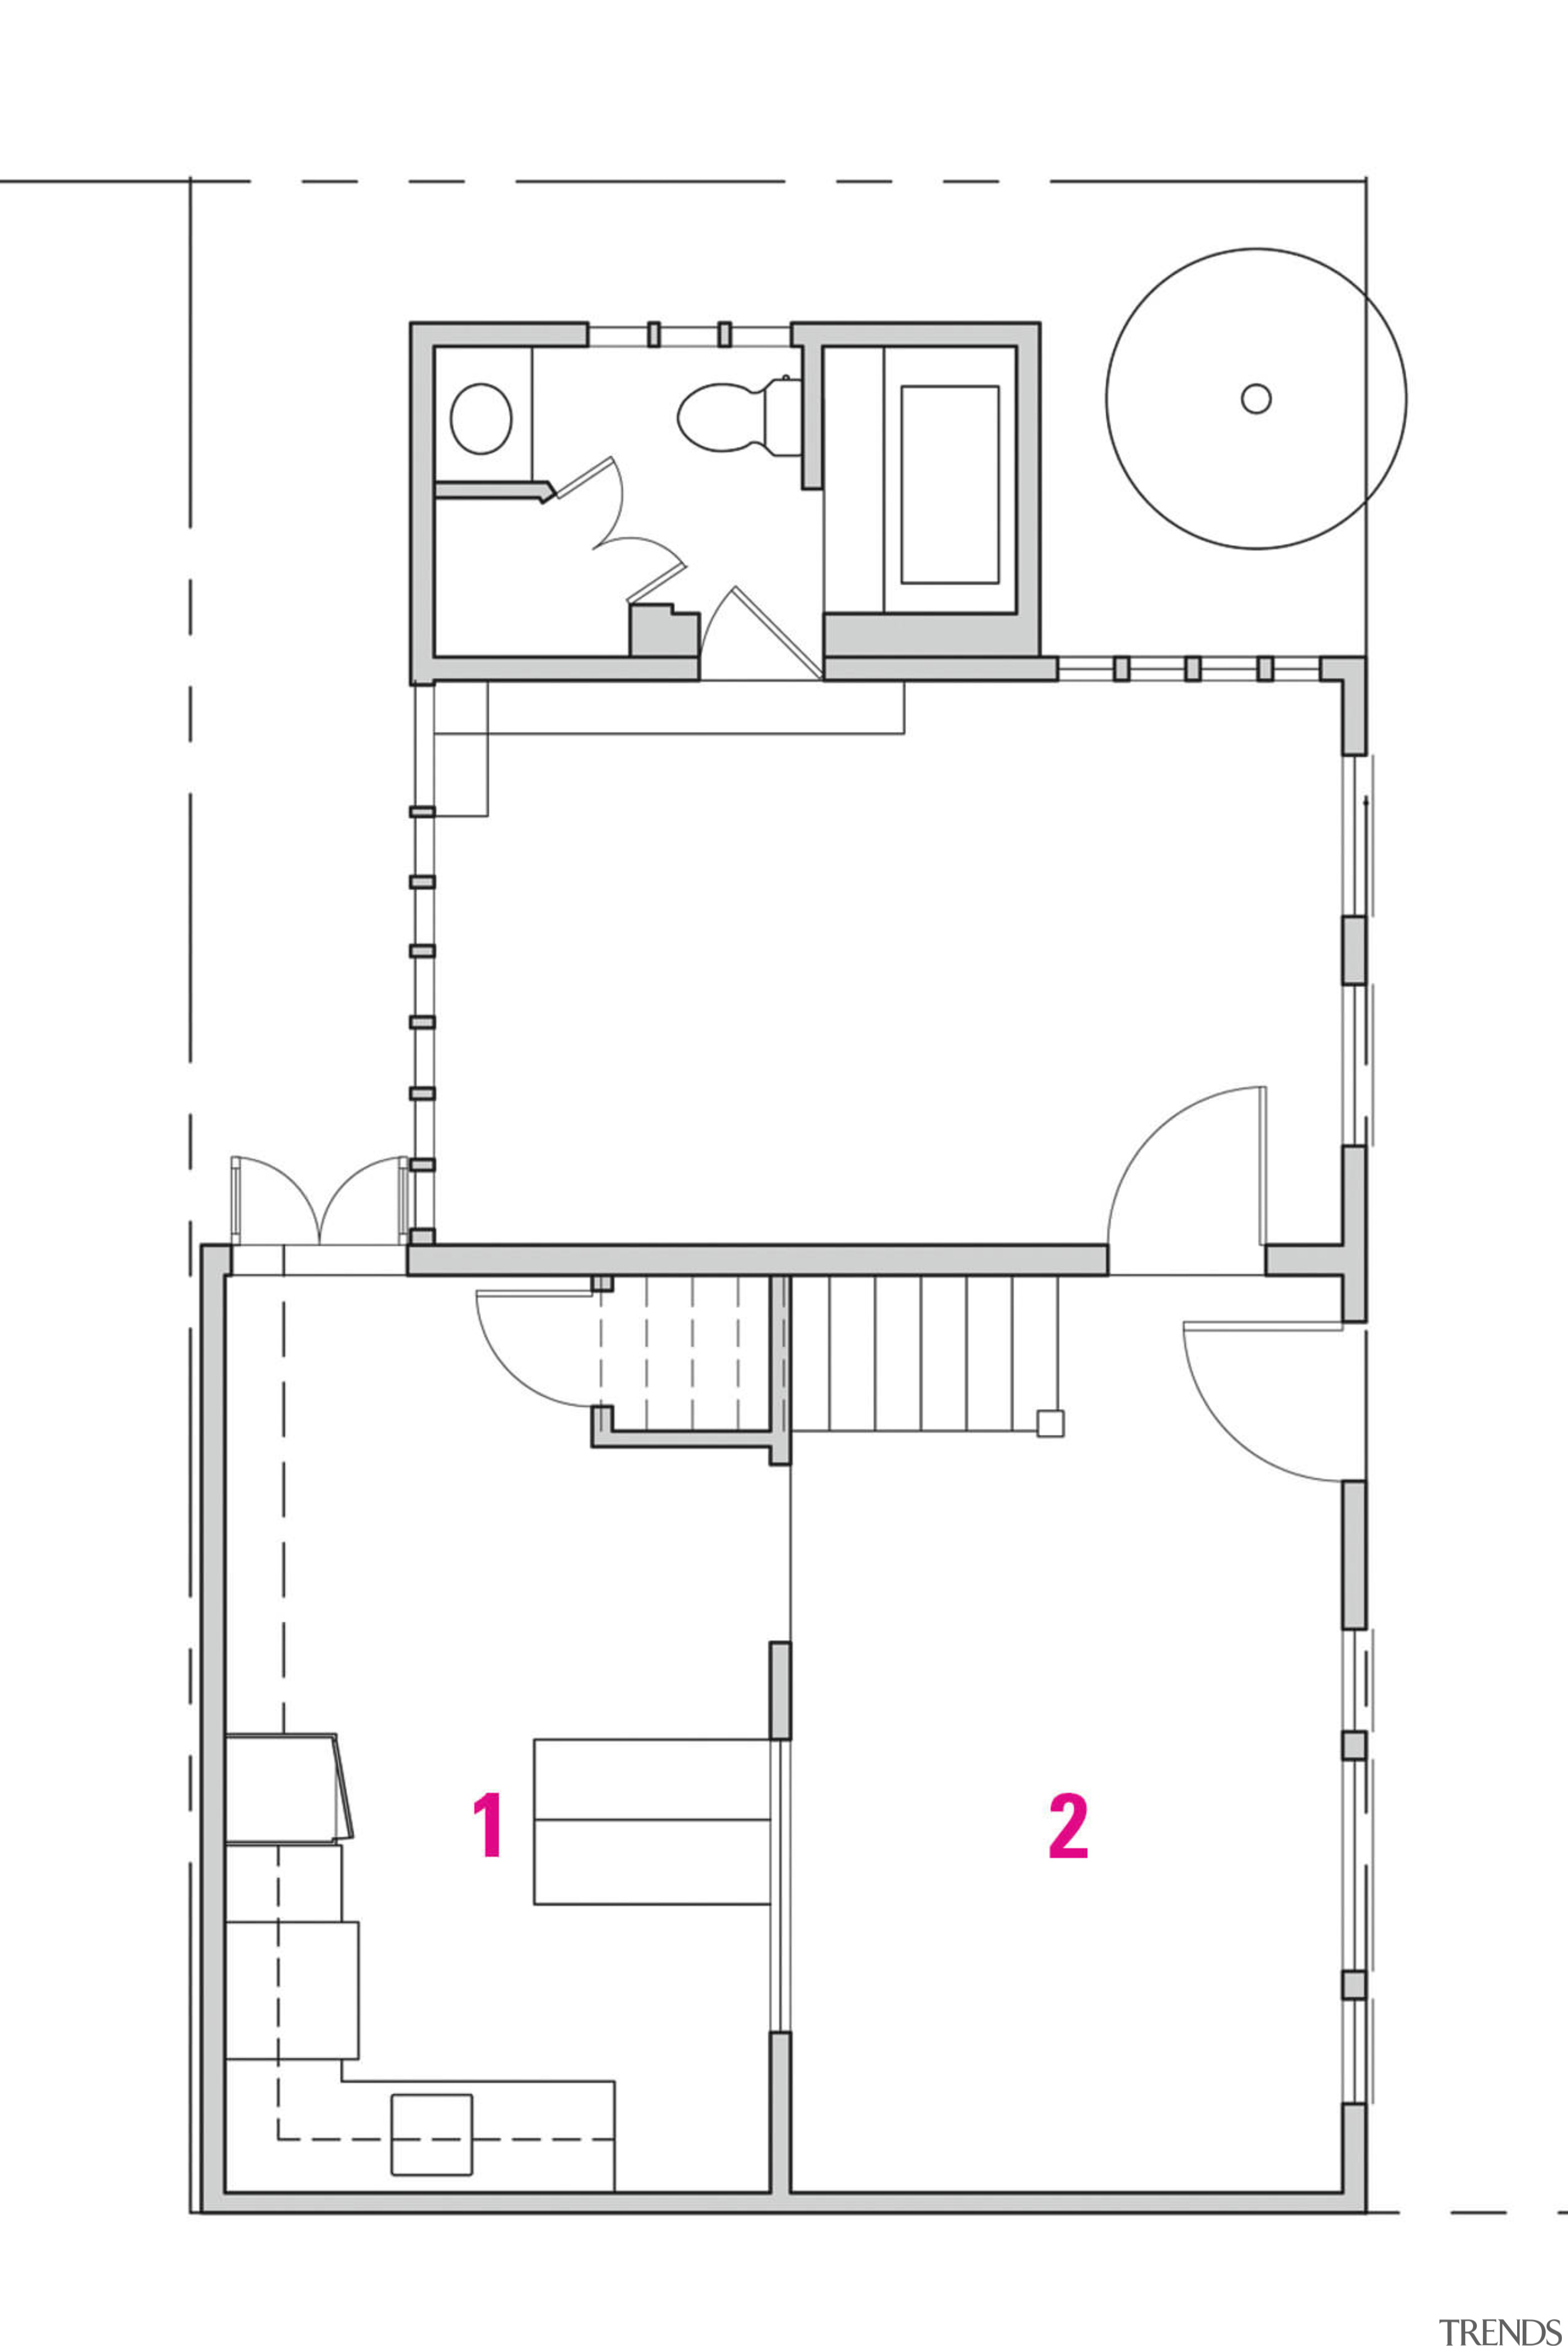 The original dining rooms (1 and 2) have angle, area, design, diagram, drawing, floor plan, font, line, plan, product, product design, square, technical drawing, text, white